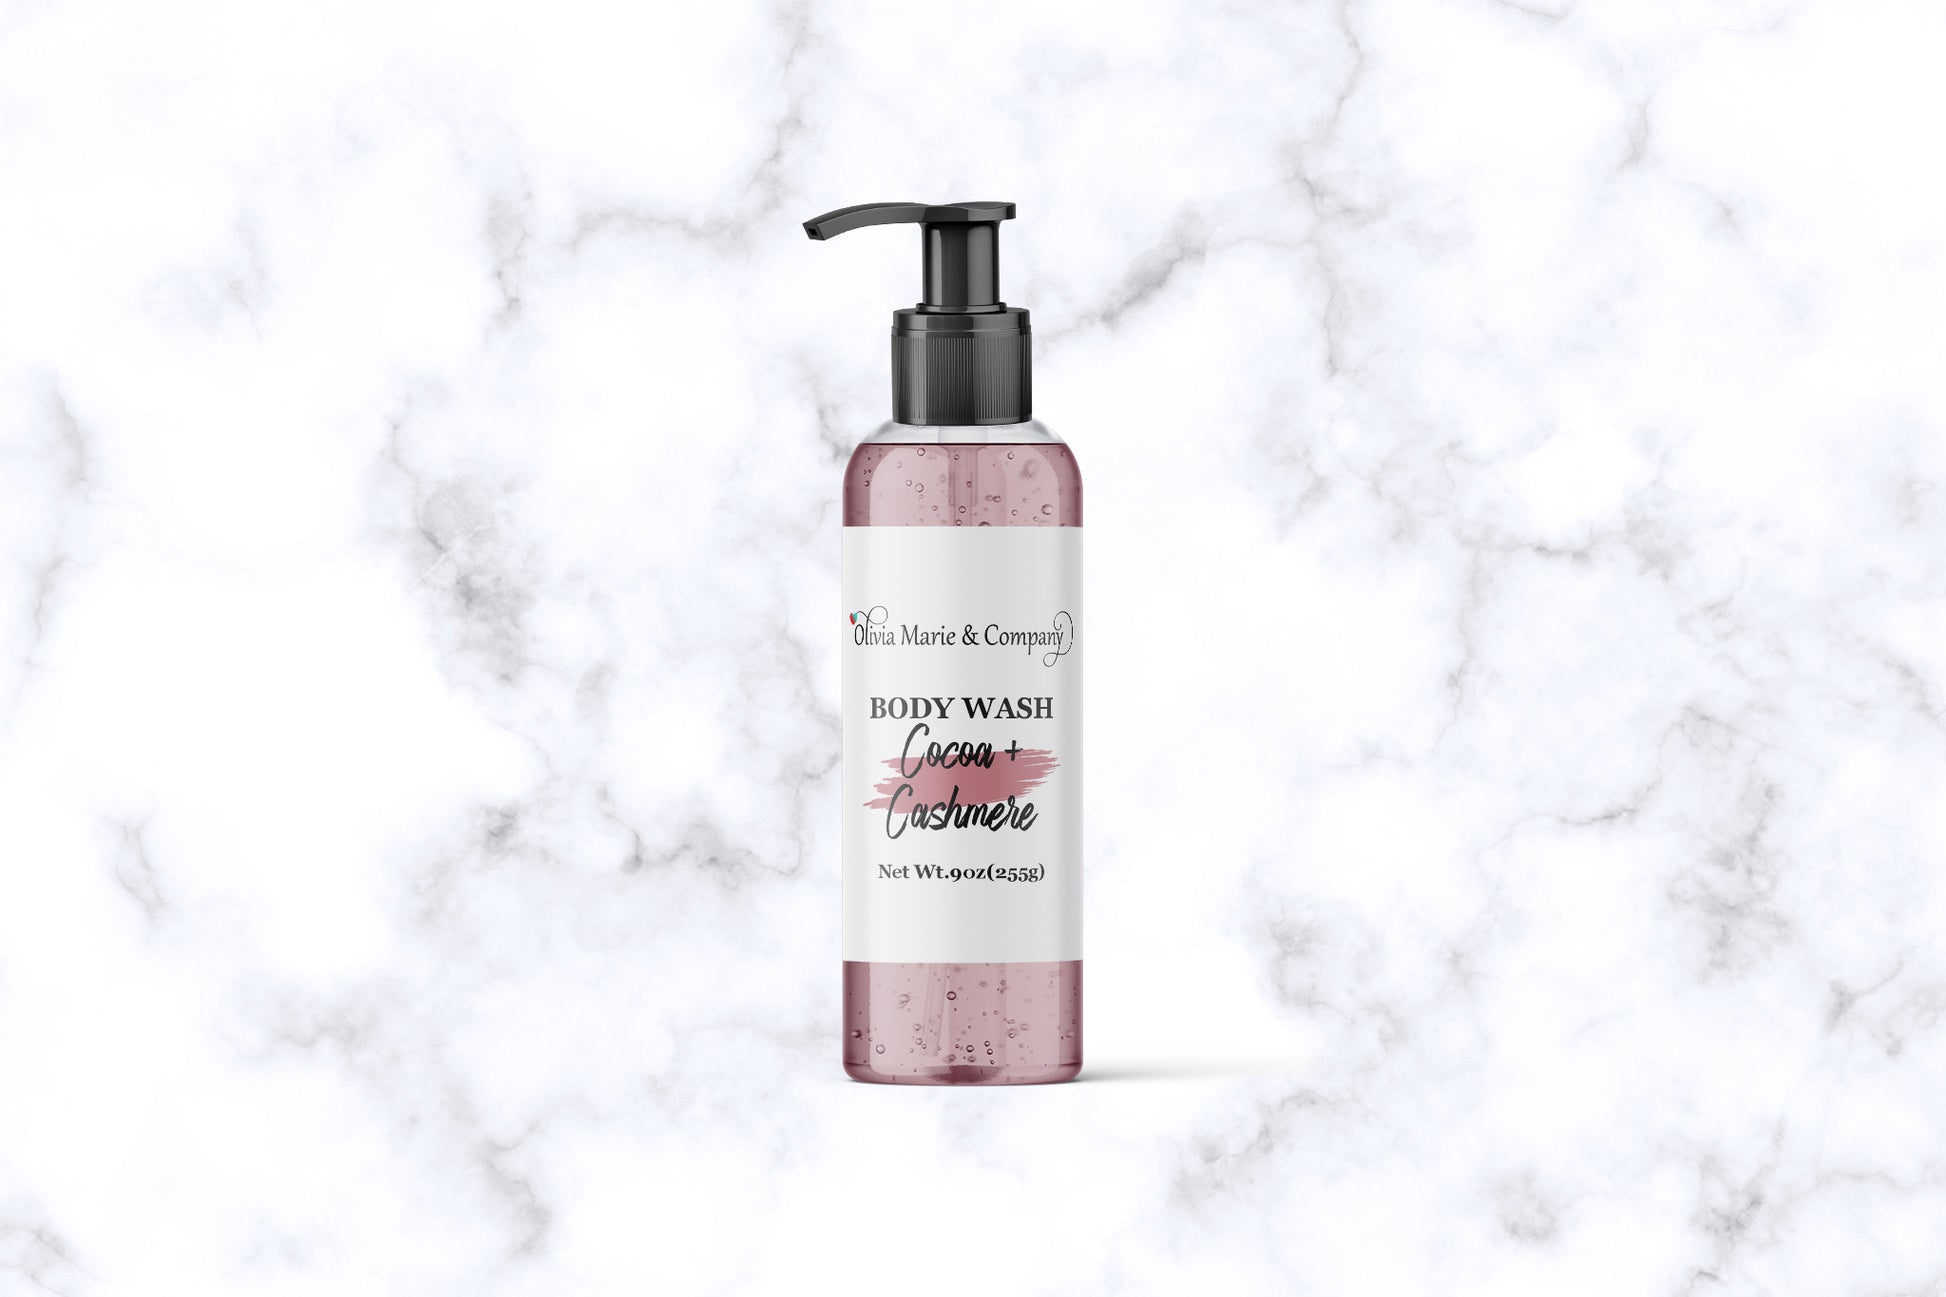 Cocoa Butter Cashmere body wash in a clear bottle with a rose pink color liquid.